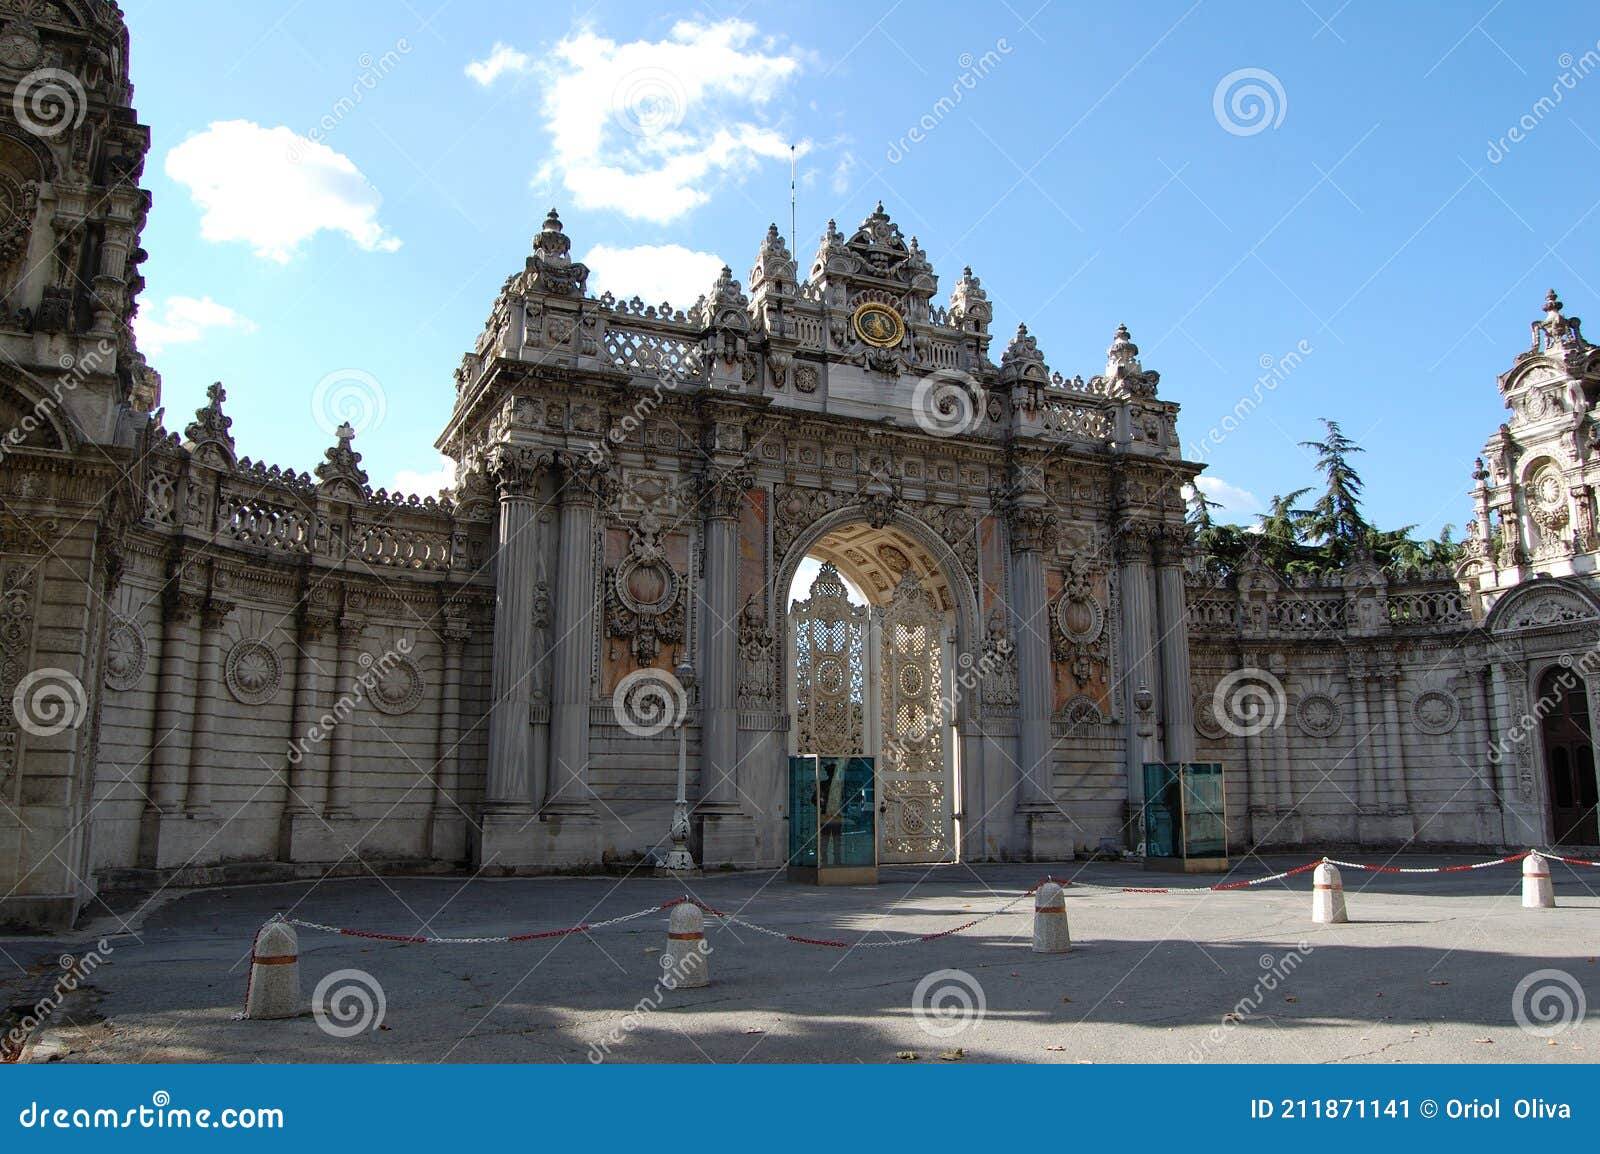 view of the main places and monuments of istanbul (turkey): dolmabahce palace